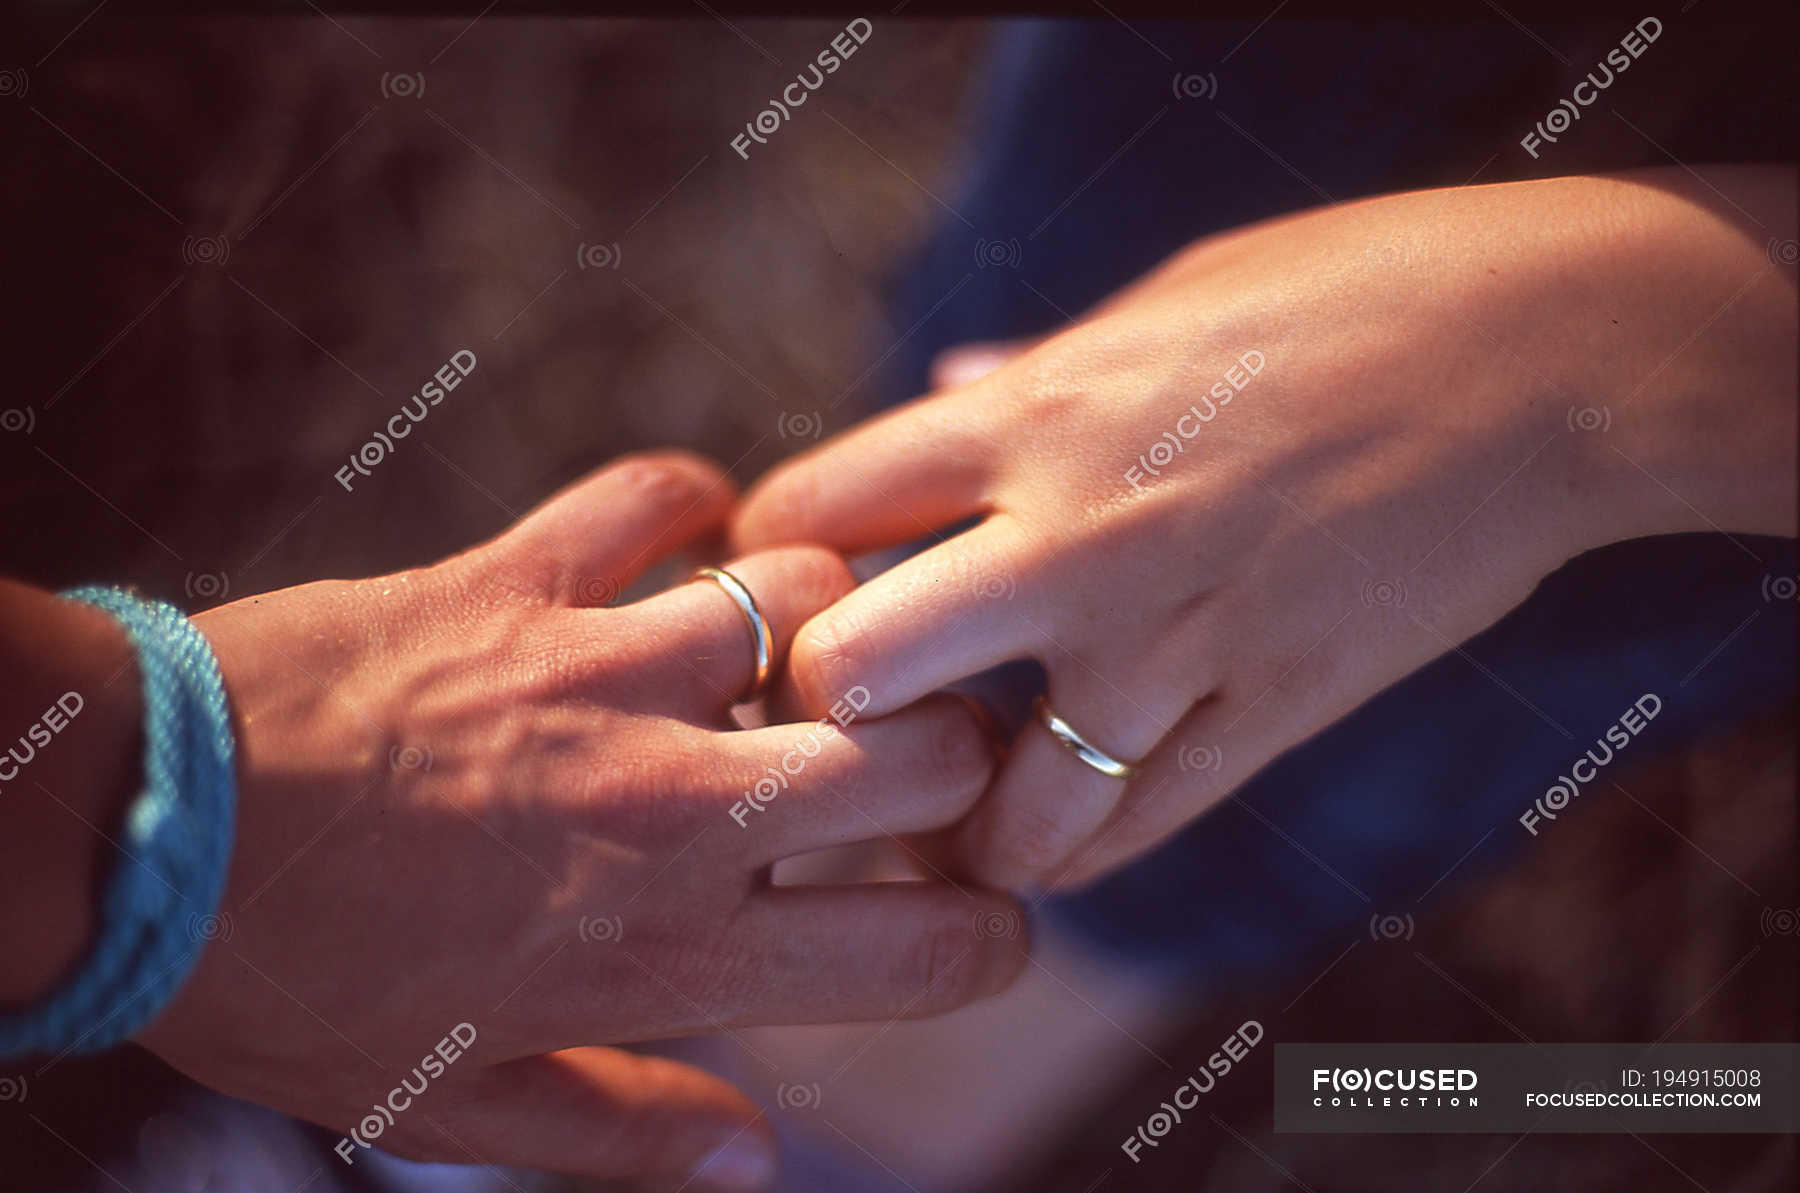 engagement rings on hand couple